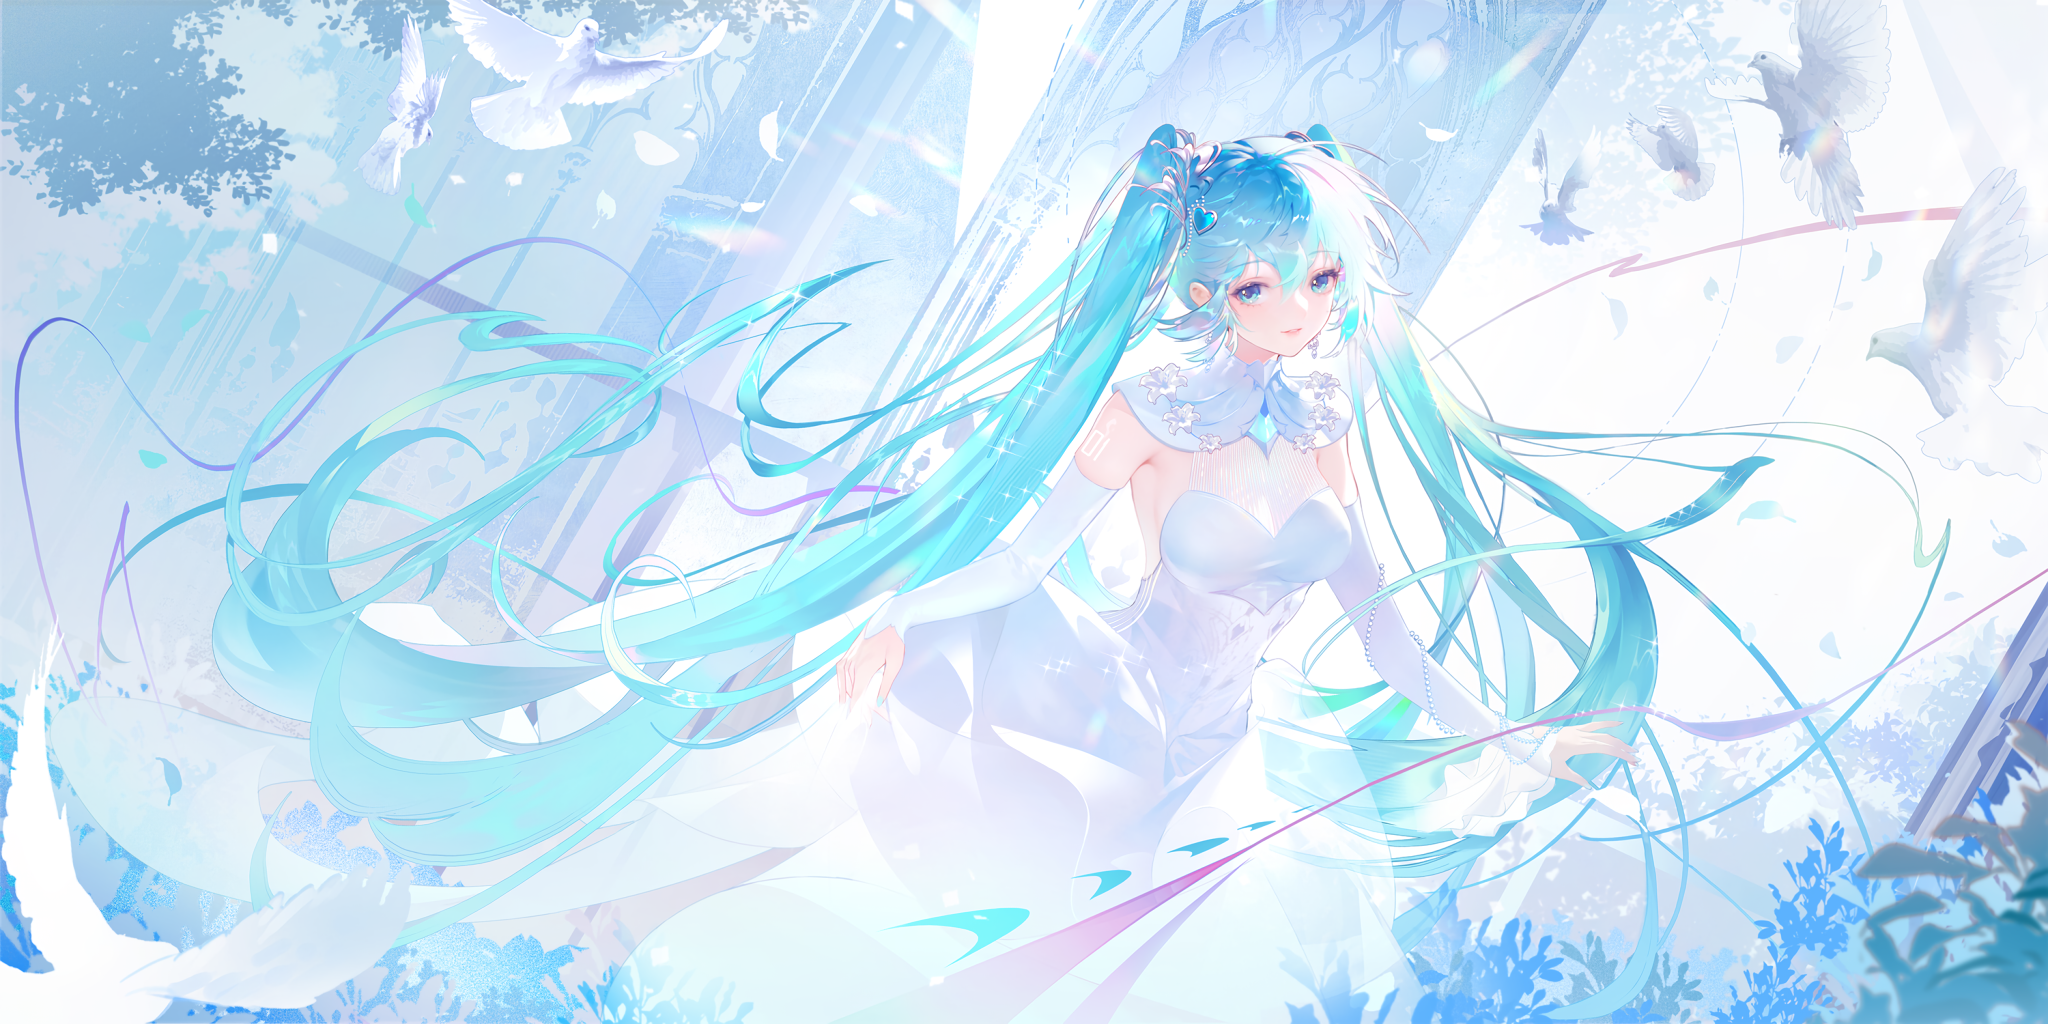 Anime 2048x1024 anime anime girls Pixiv Vocaloid Hatsune Miku jie xiaoming hair between eyes twintails looking at viewer dress white dress elbow gloves white gloves lifting dress blue nails painted nails blue hair blue eyes parted lips sparkles pillar dove white animals bright birds